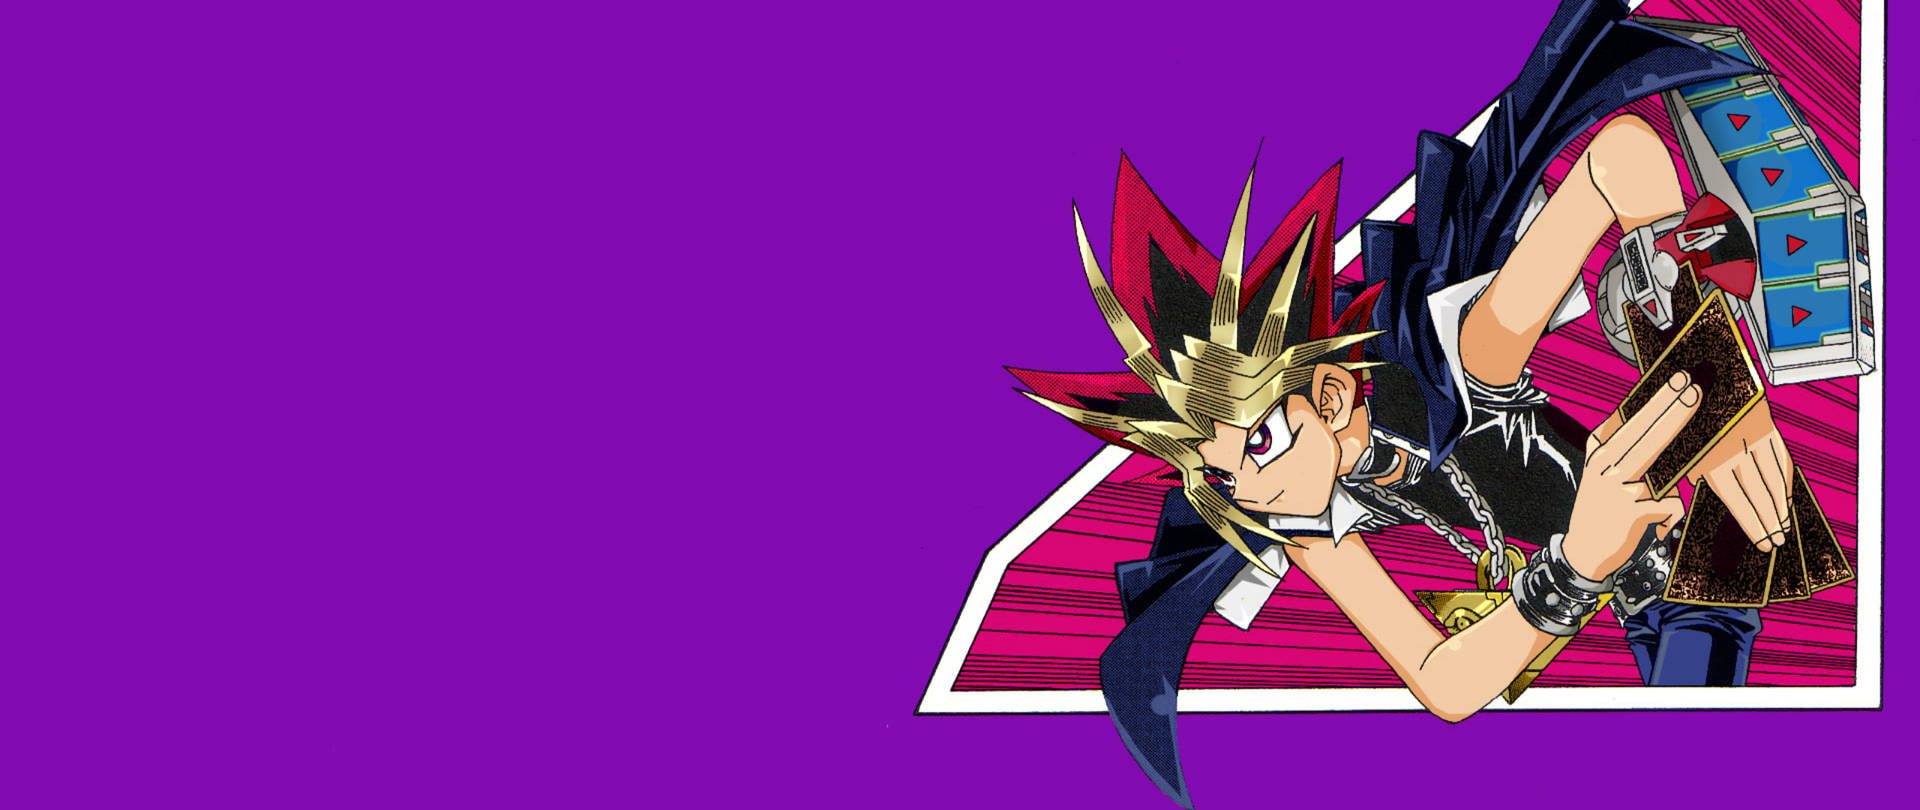 Free Yugioh Wallpaper Downloads, [100+] Yugioh Wallpapers for FREE |  